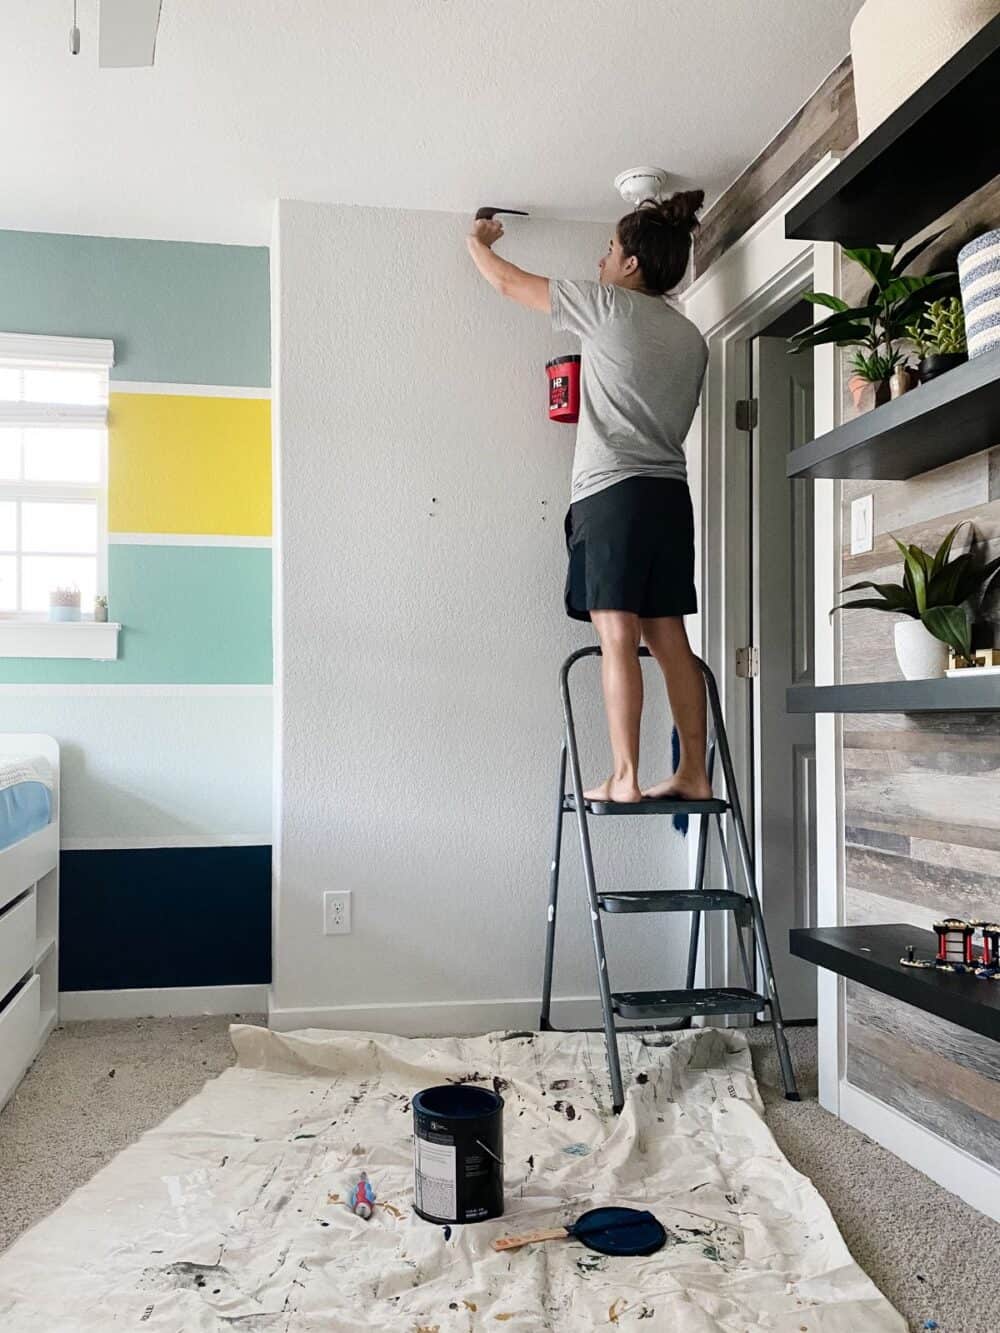 Woman cutting in edges around ceiling to paint ceiling